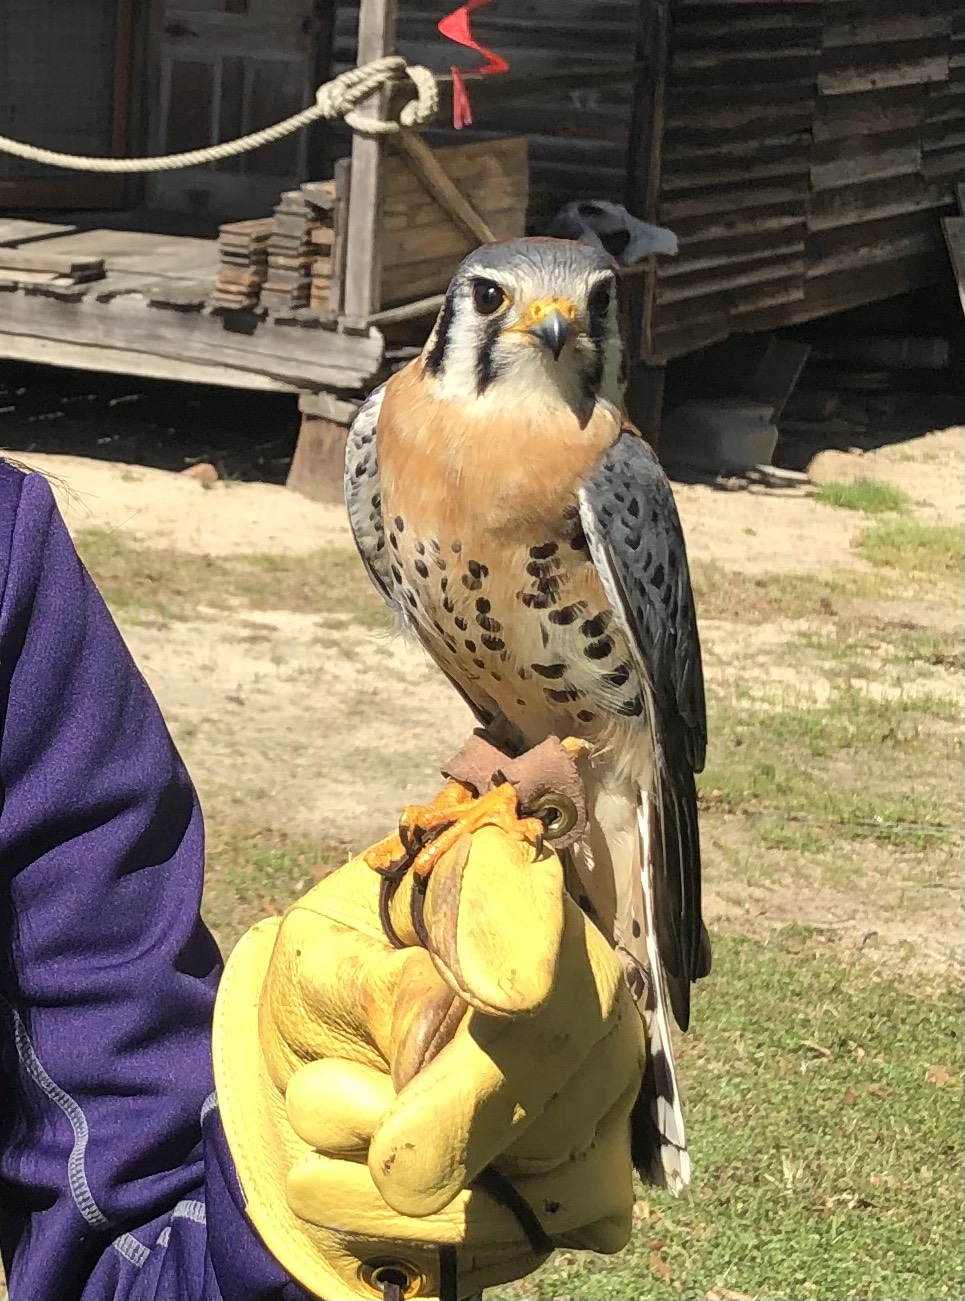  Kestrels are the smallest falcon in North America. They are very common in South Carolina and are often used to hunt house sparrows and starlings, both of which are invasive species and are thus huntable year-round. 
